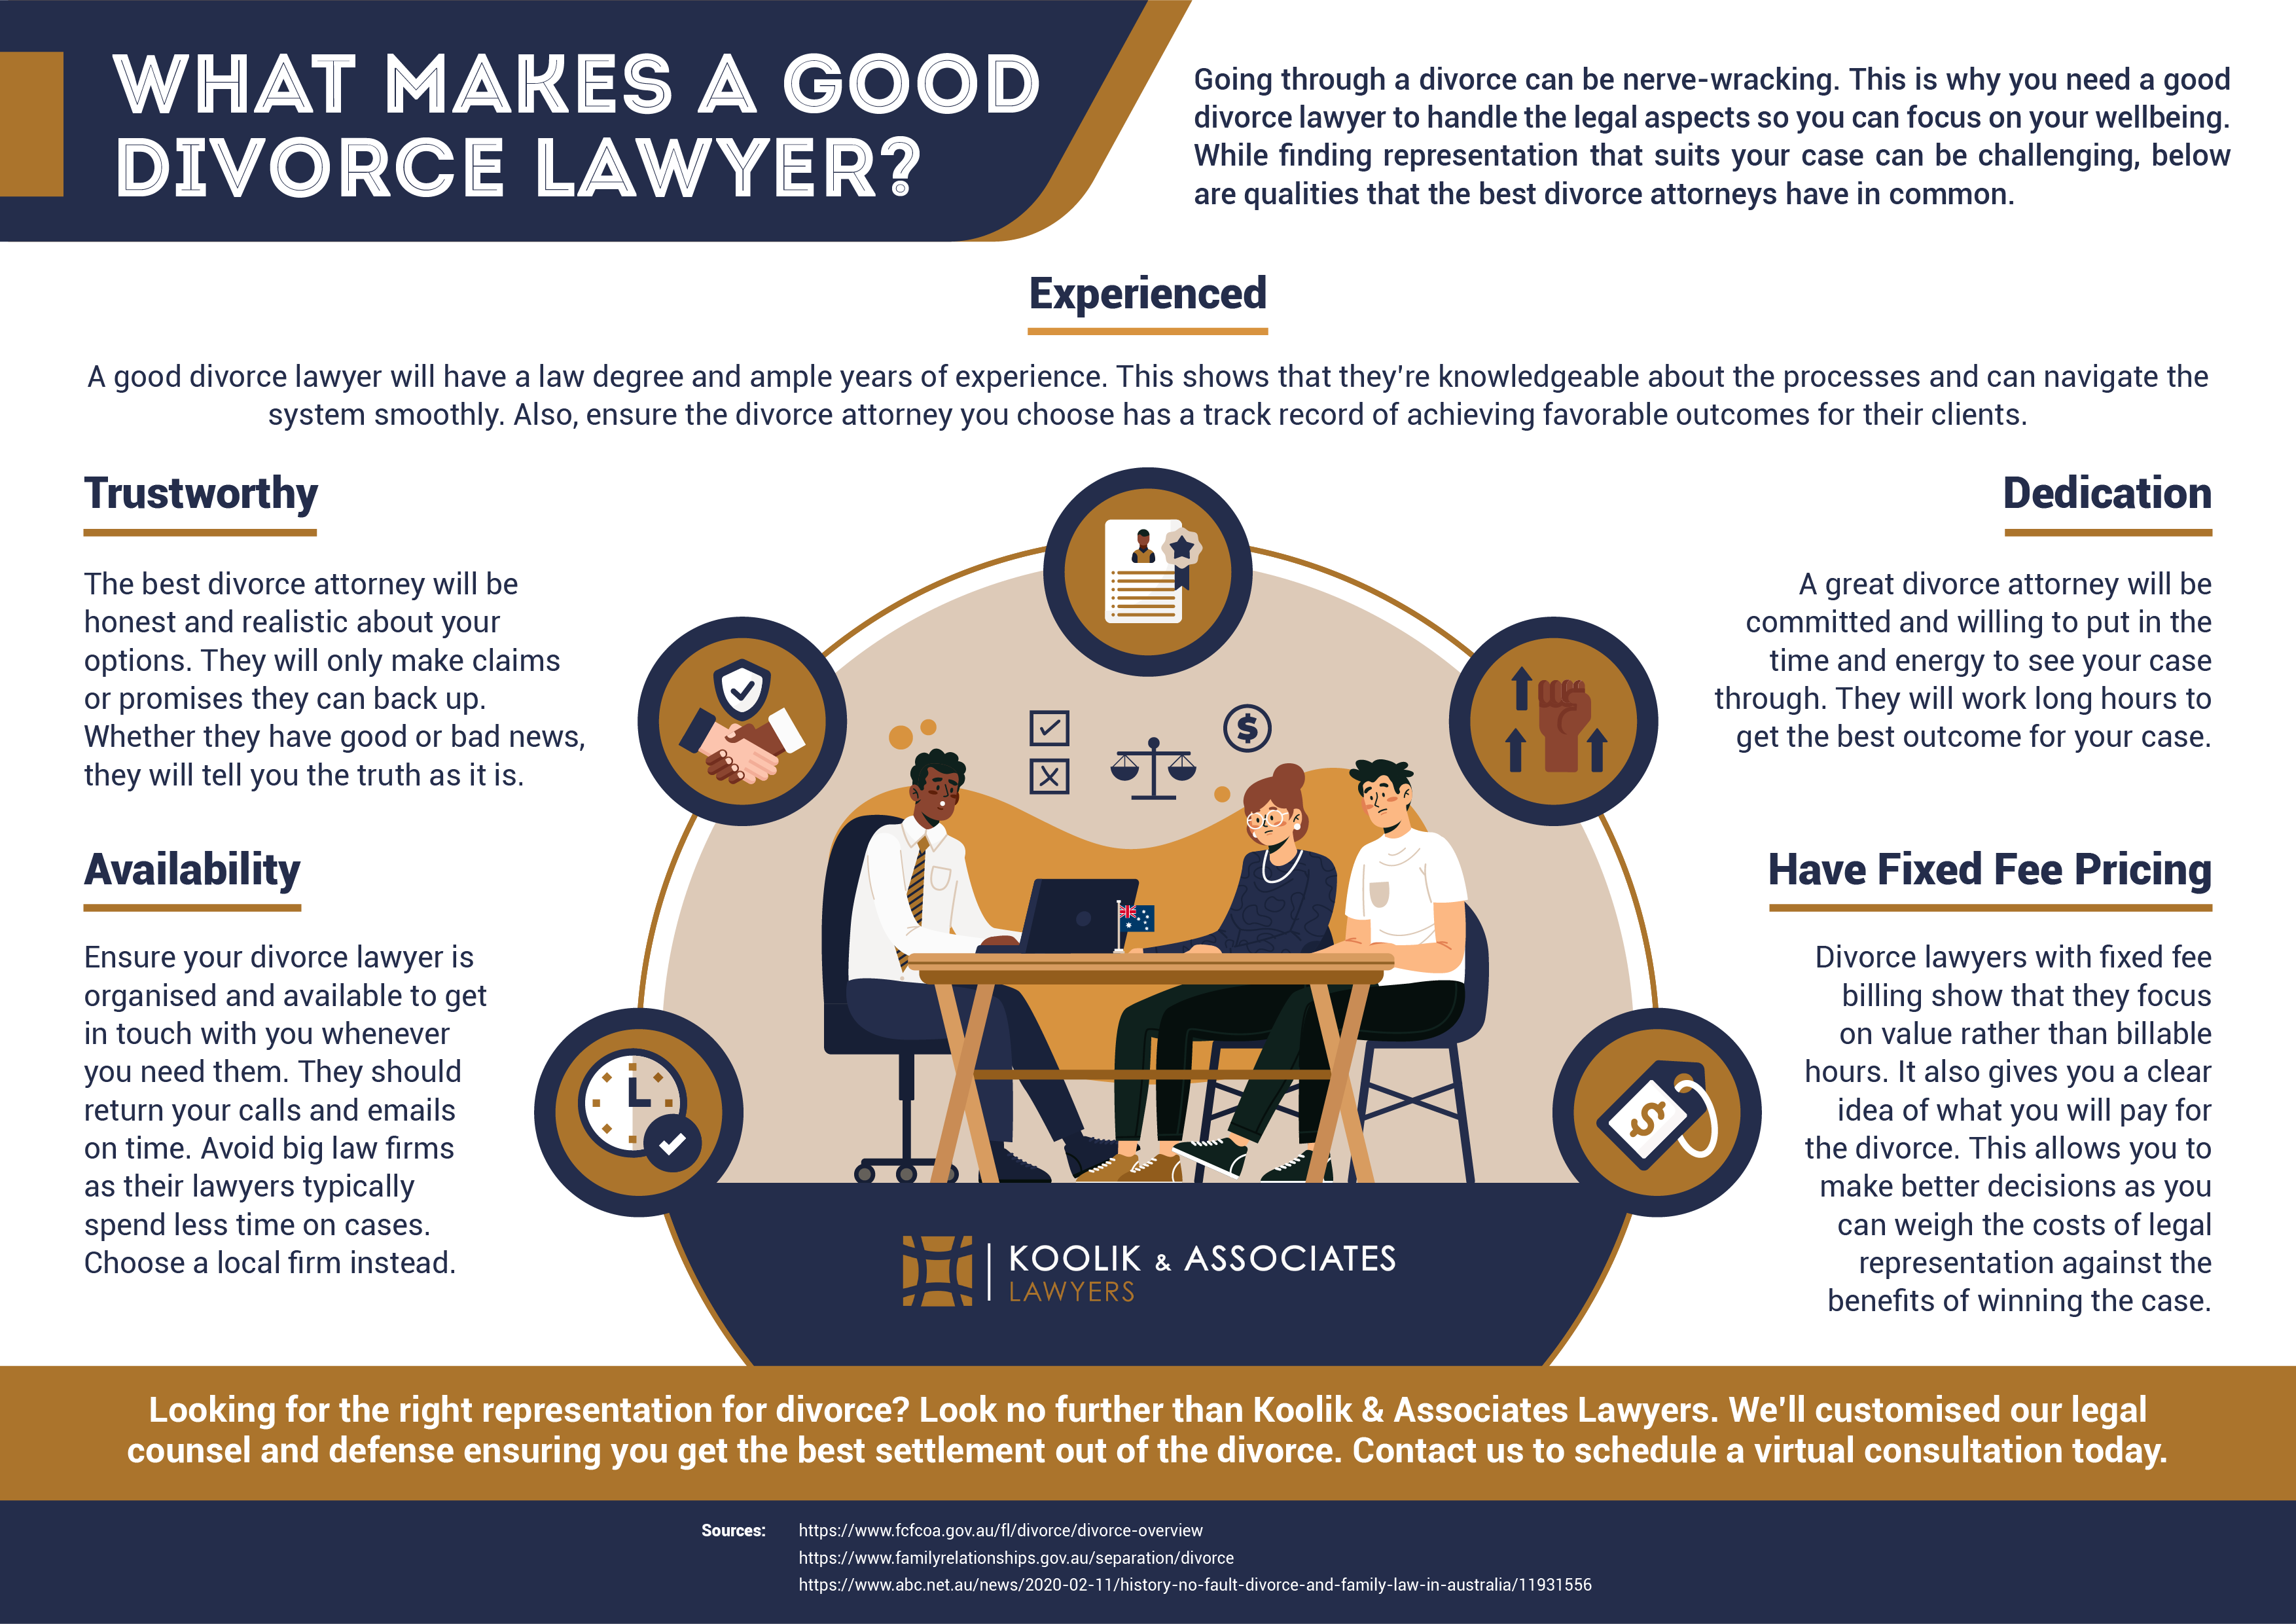 An infographic that outlines what makes a good divorce lawyer